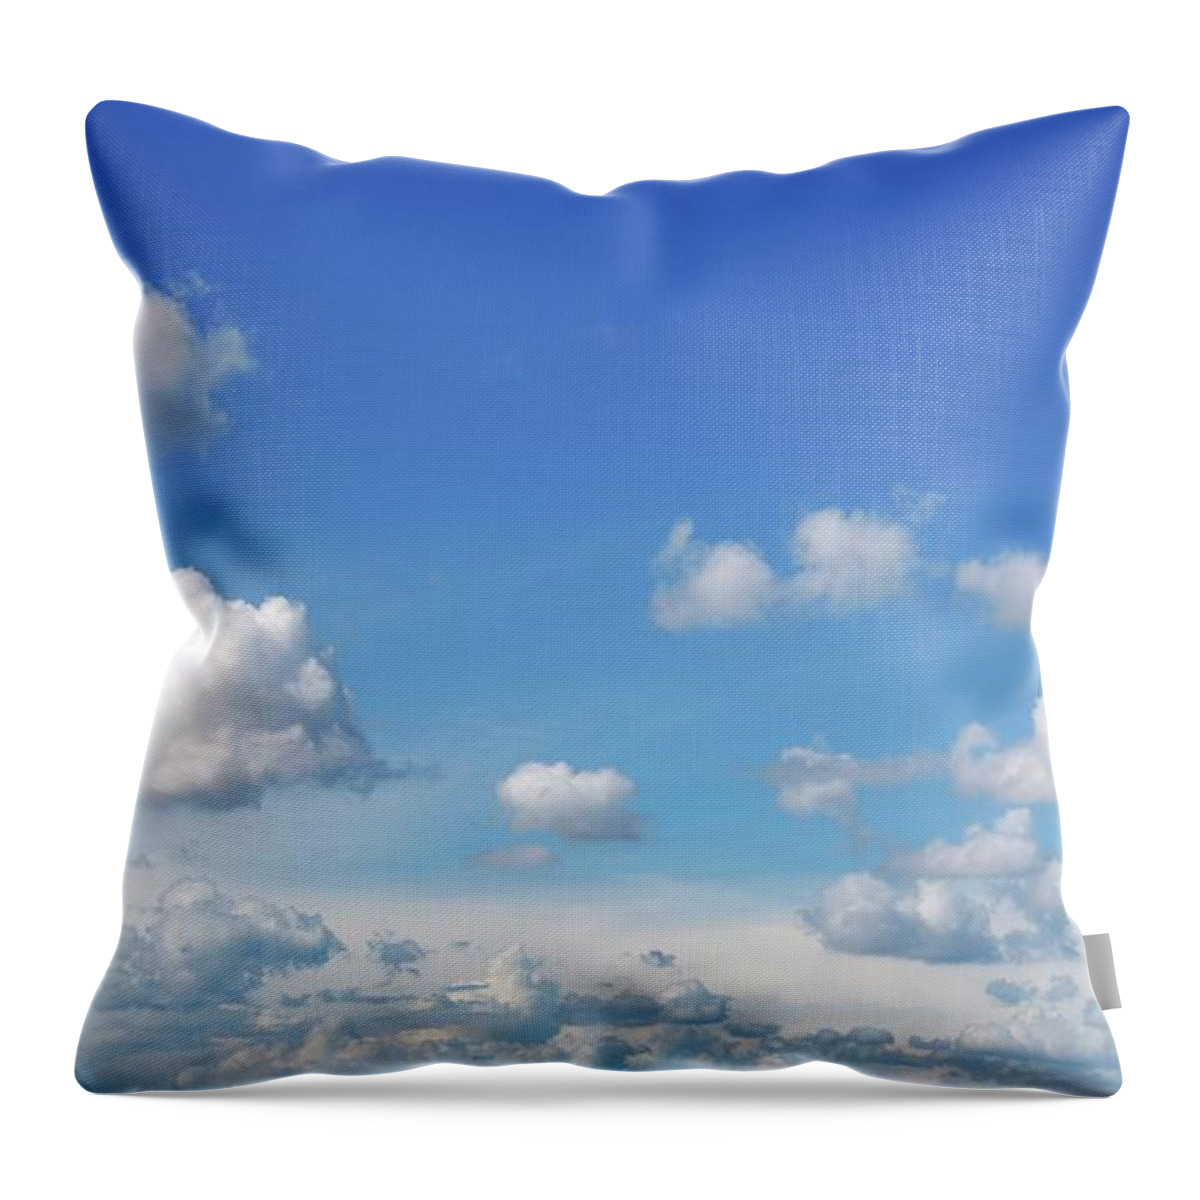 Weather Throw Pillow featuring the digital art Blue Sky With Cumulus Clouds, Artwork #3 by Leonello Calvetti